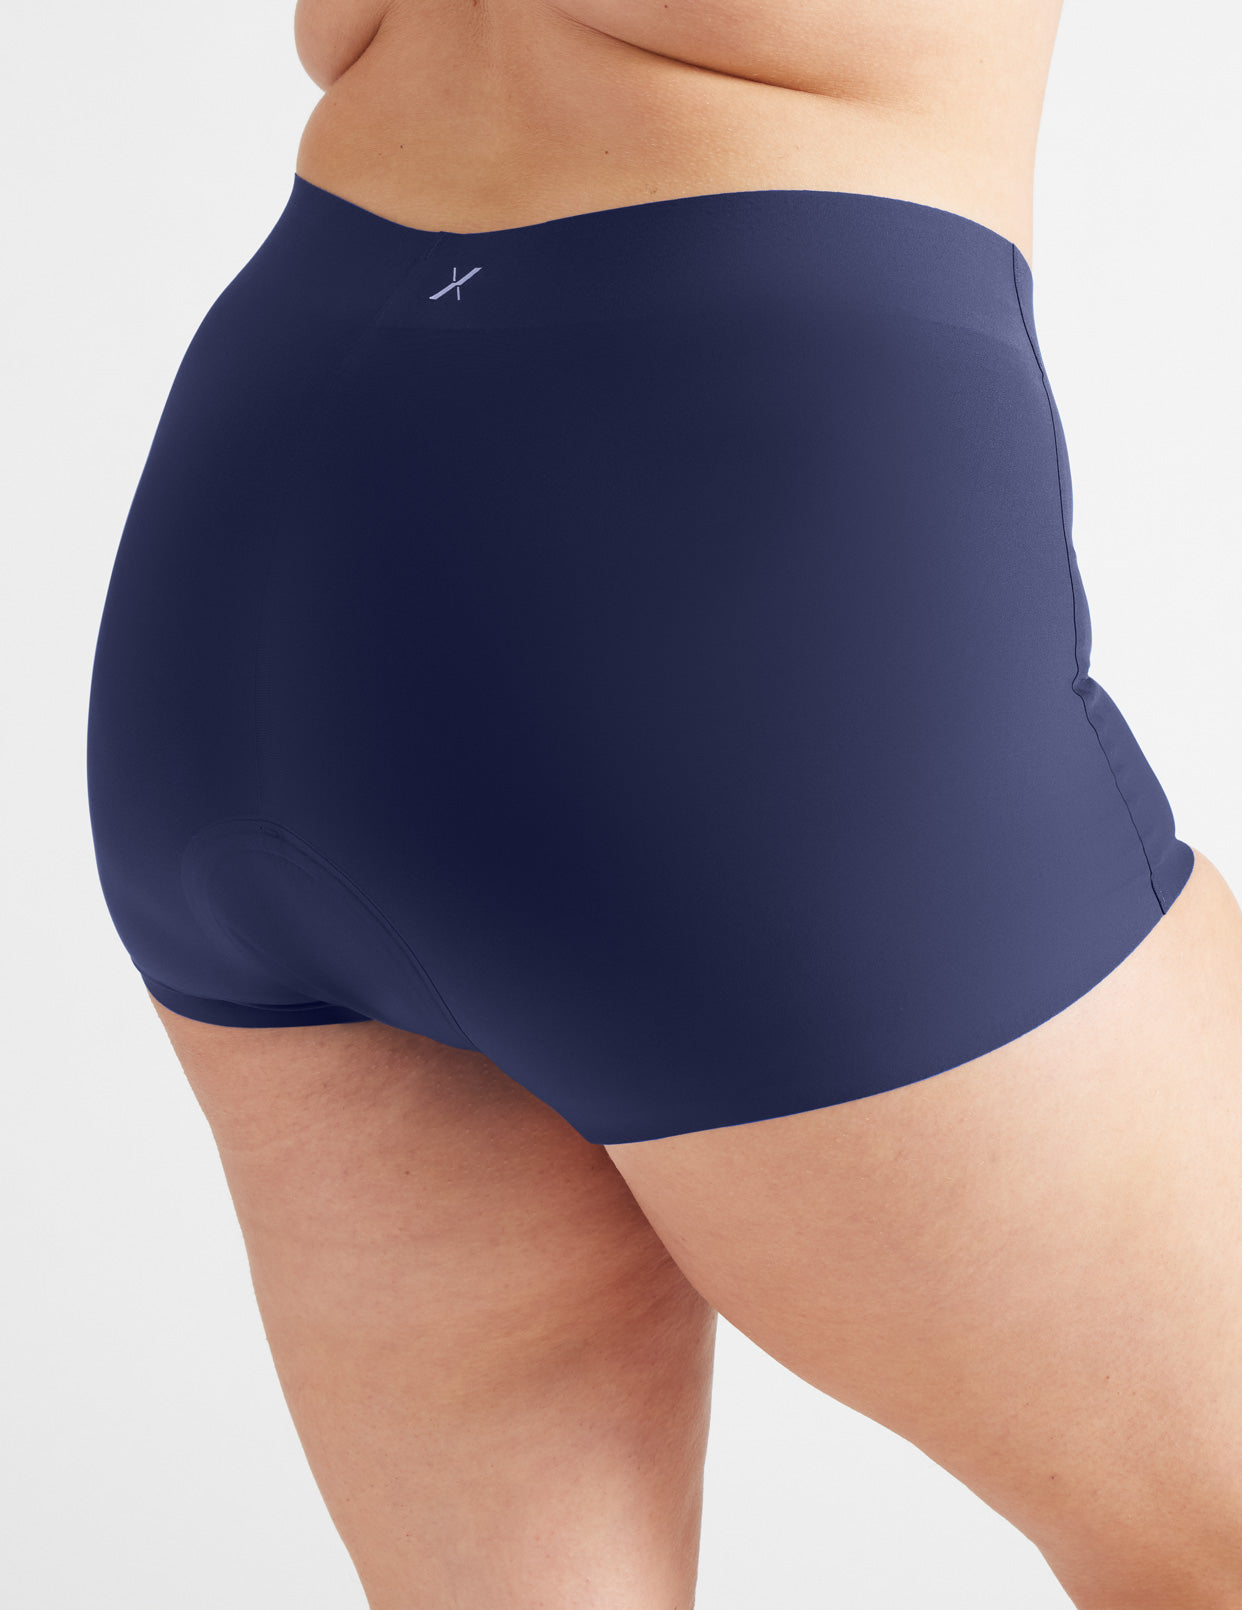 Panty Party - 30% Off All Undies - Knix Canada